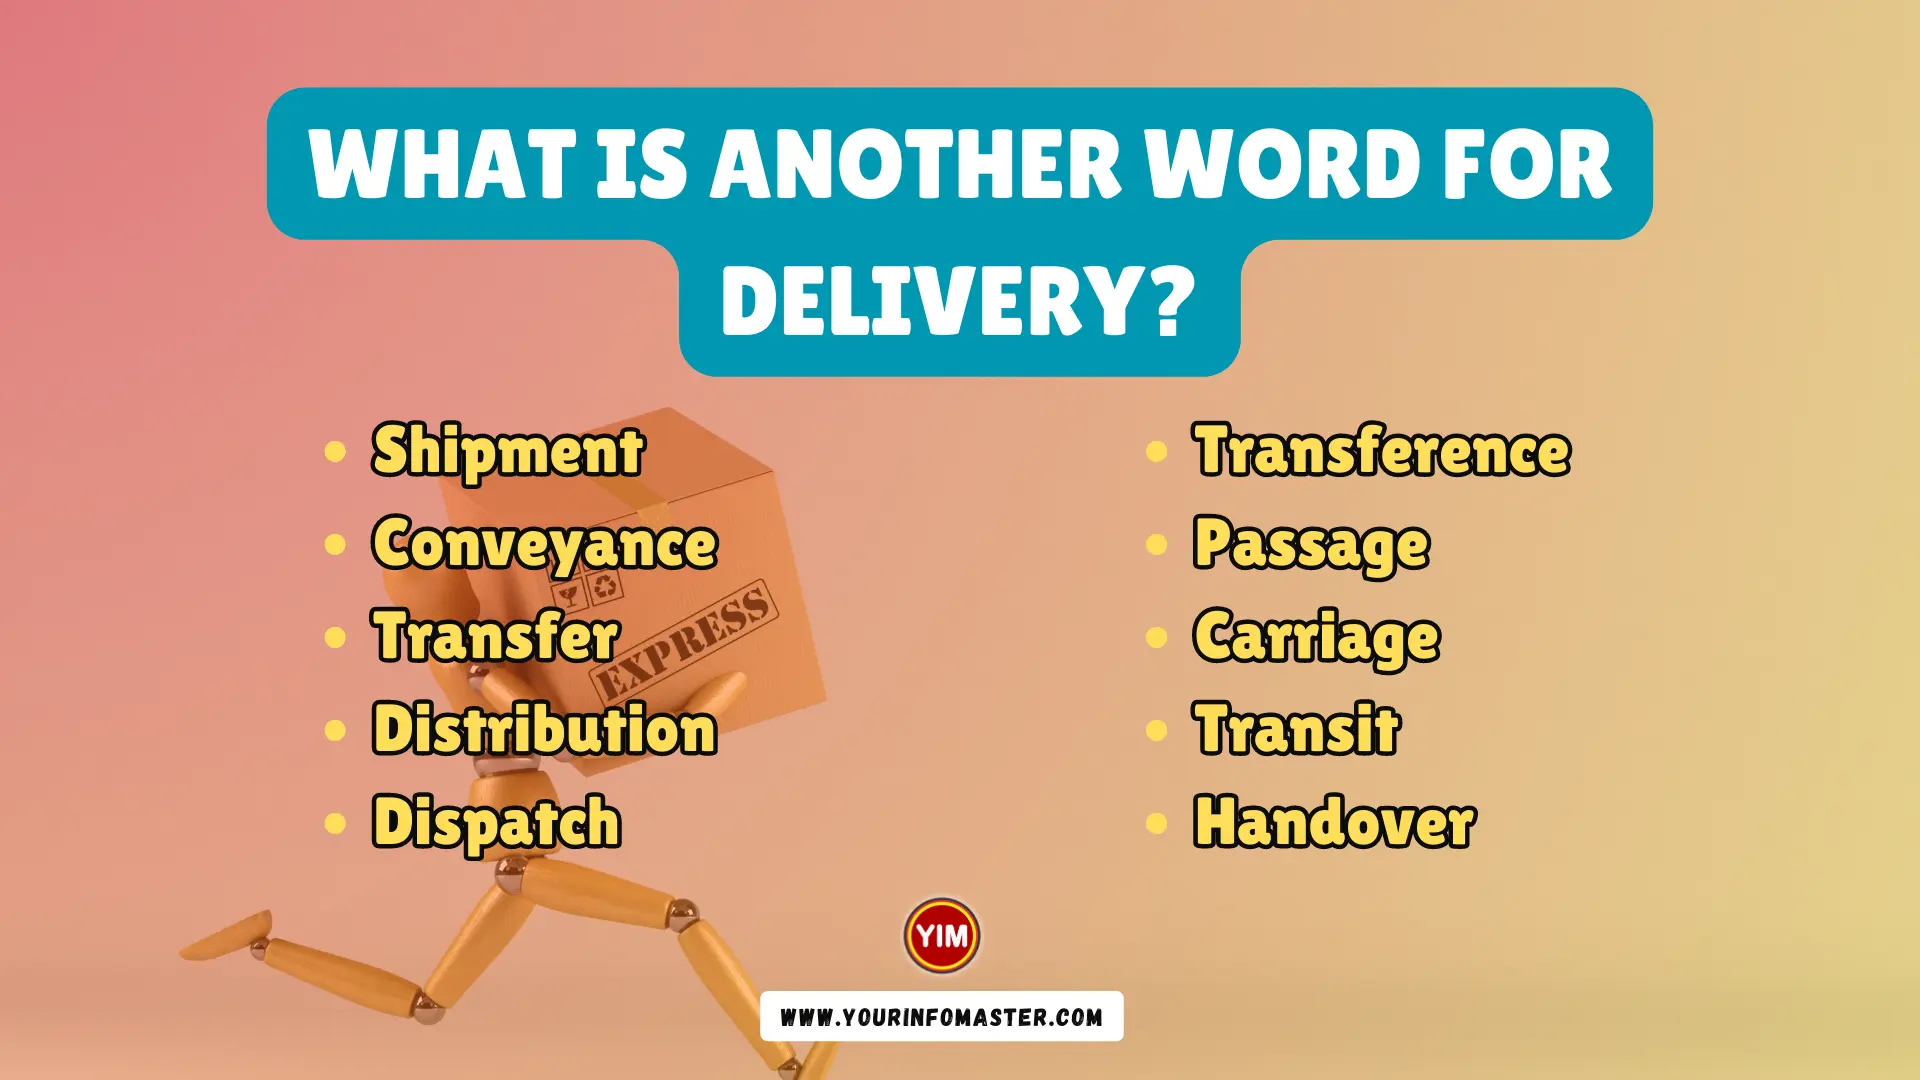 What is another word for Delivery